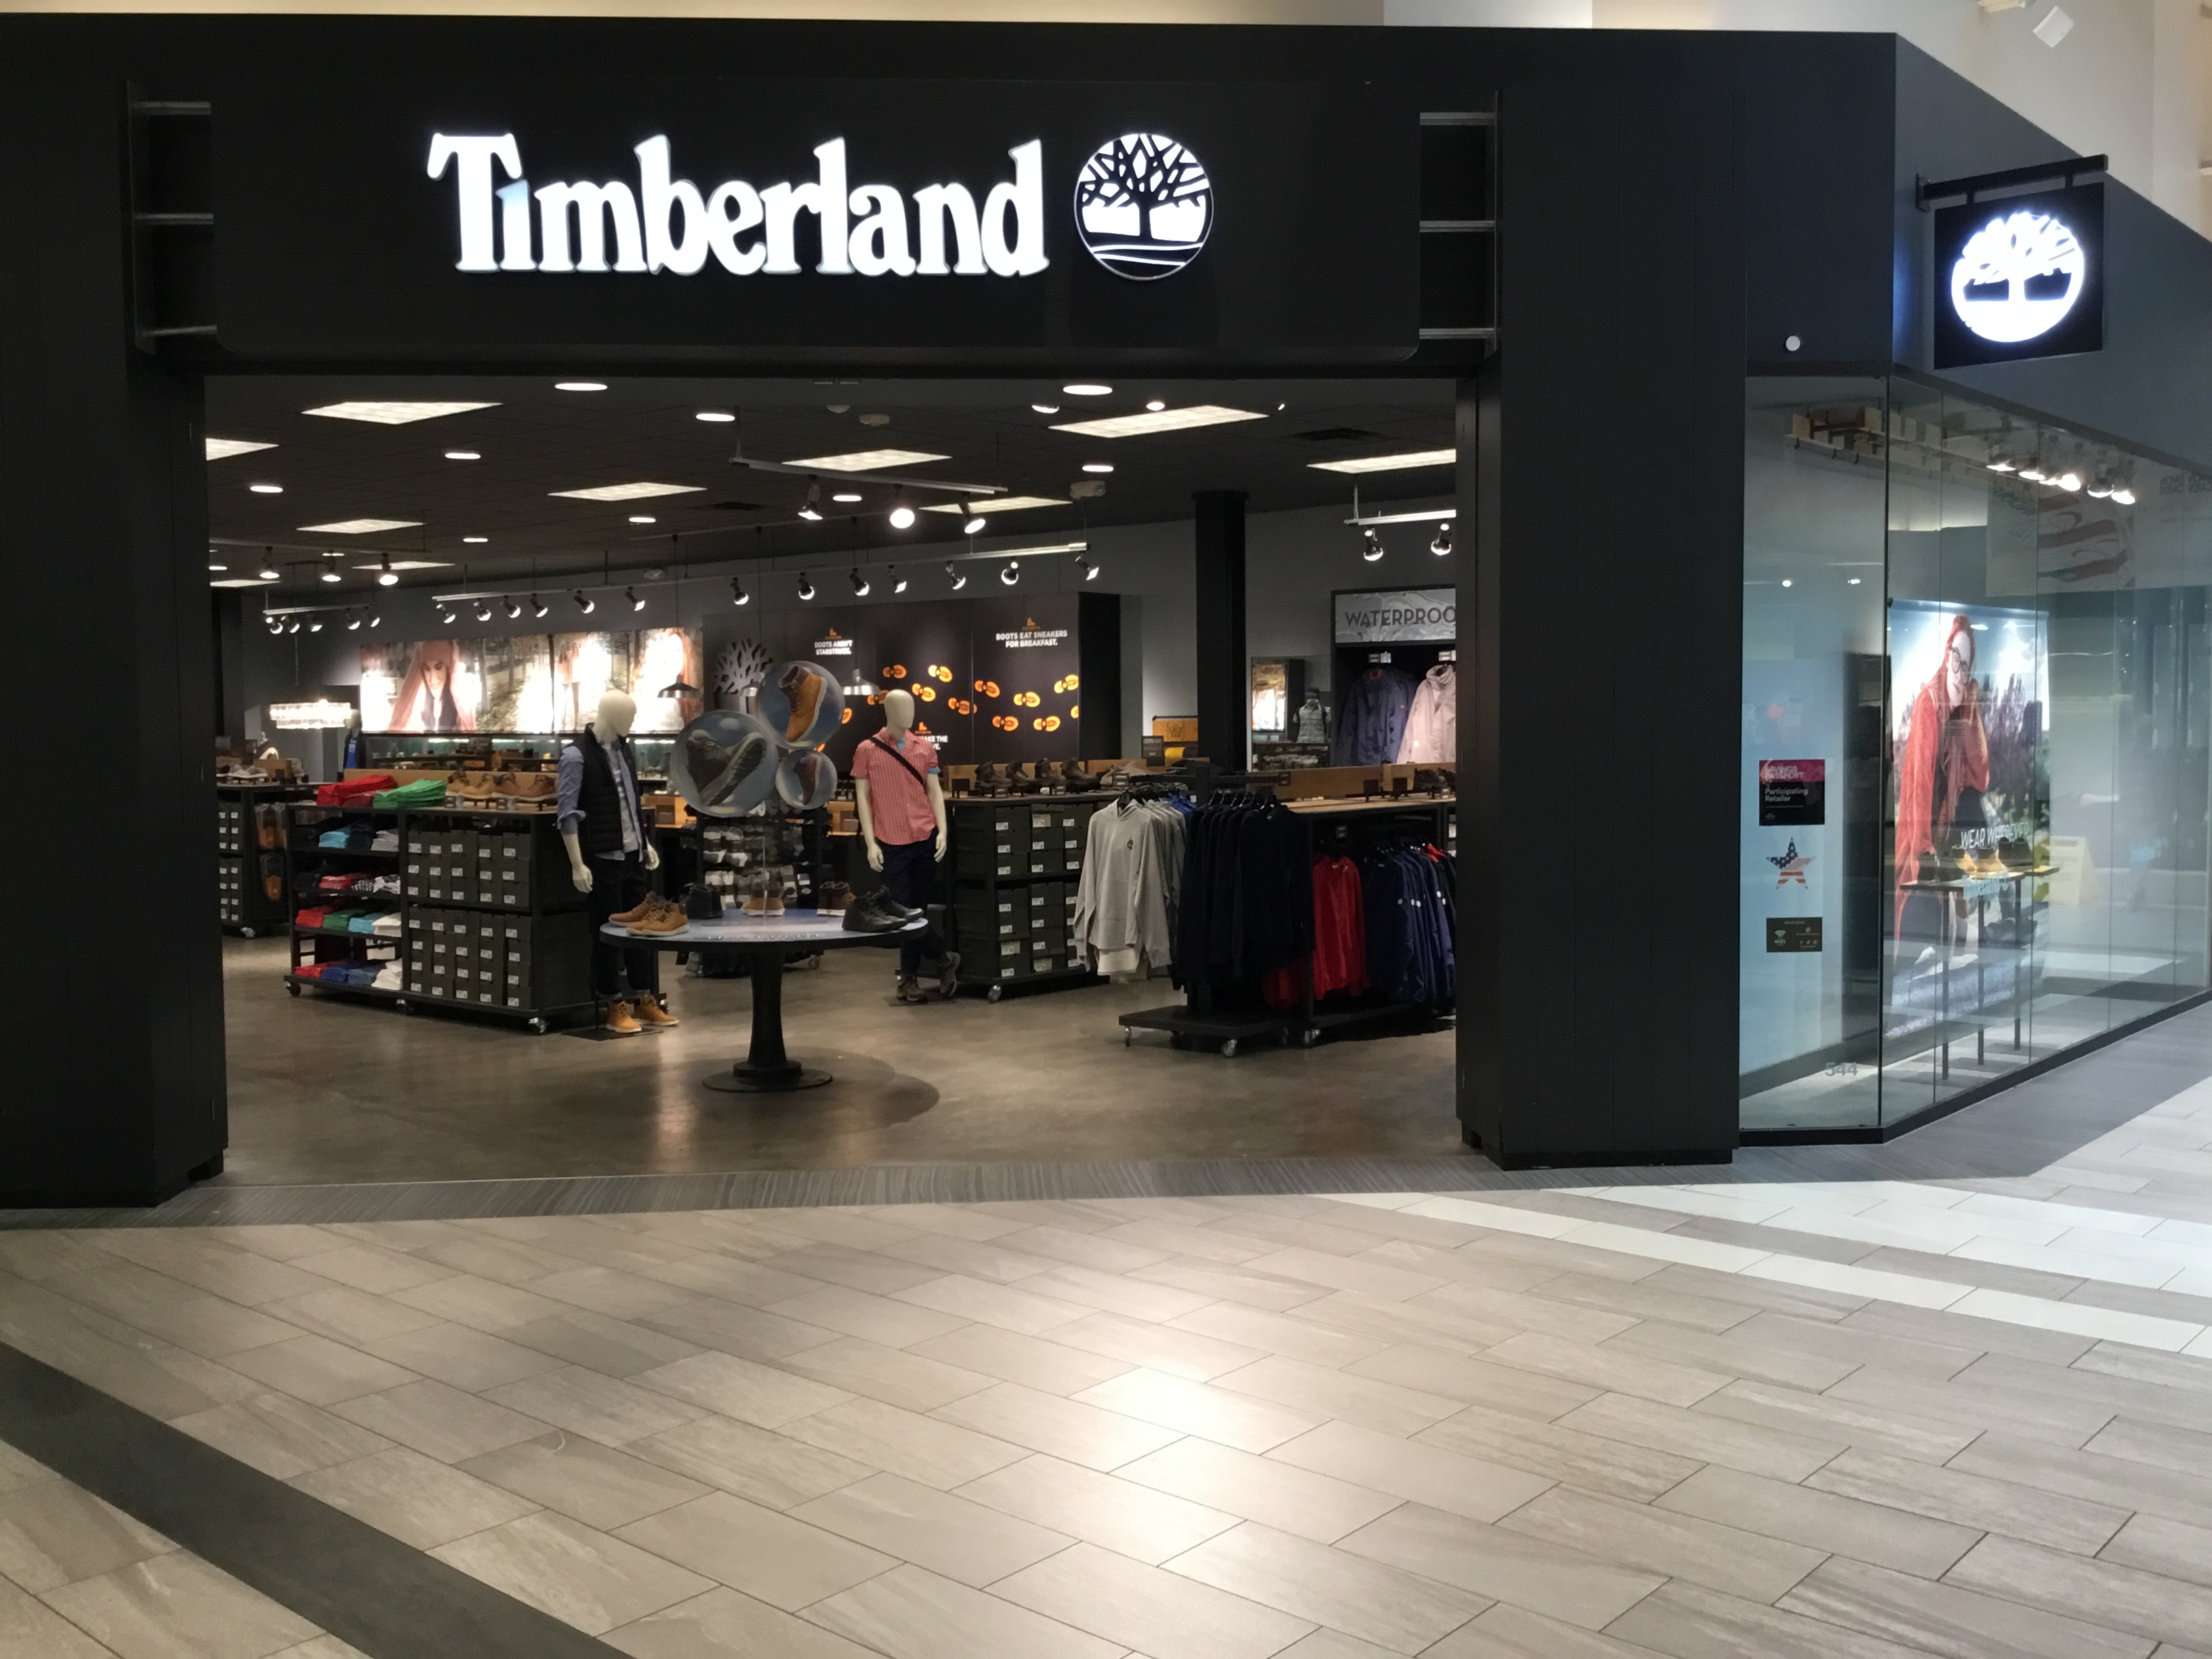 Timberland - Shoes, Clothing & Accessories in Milpitas, CA